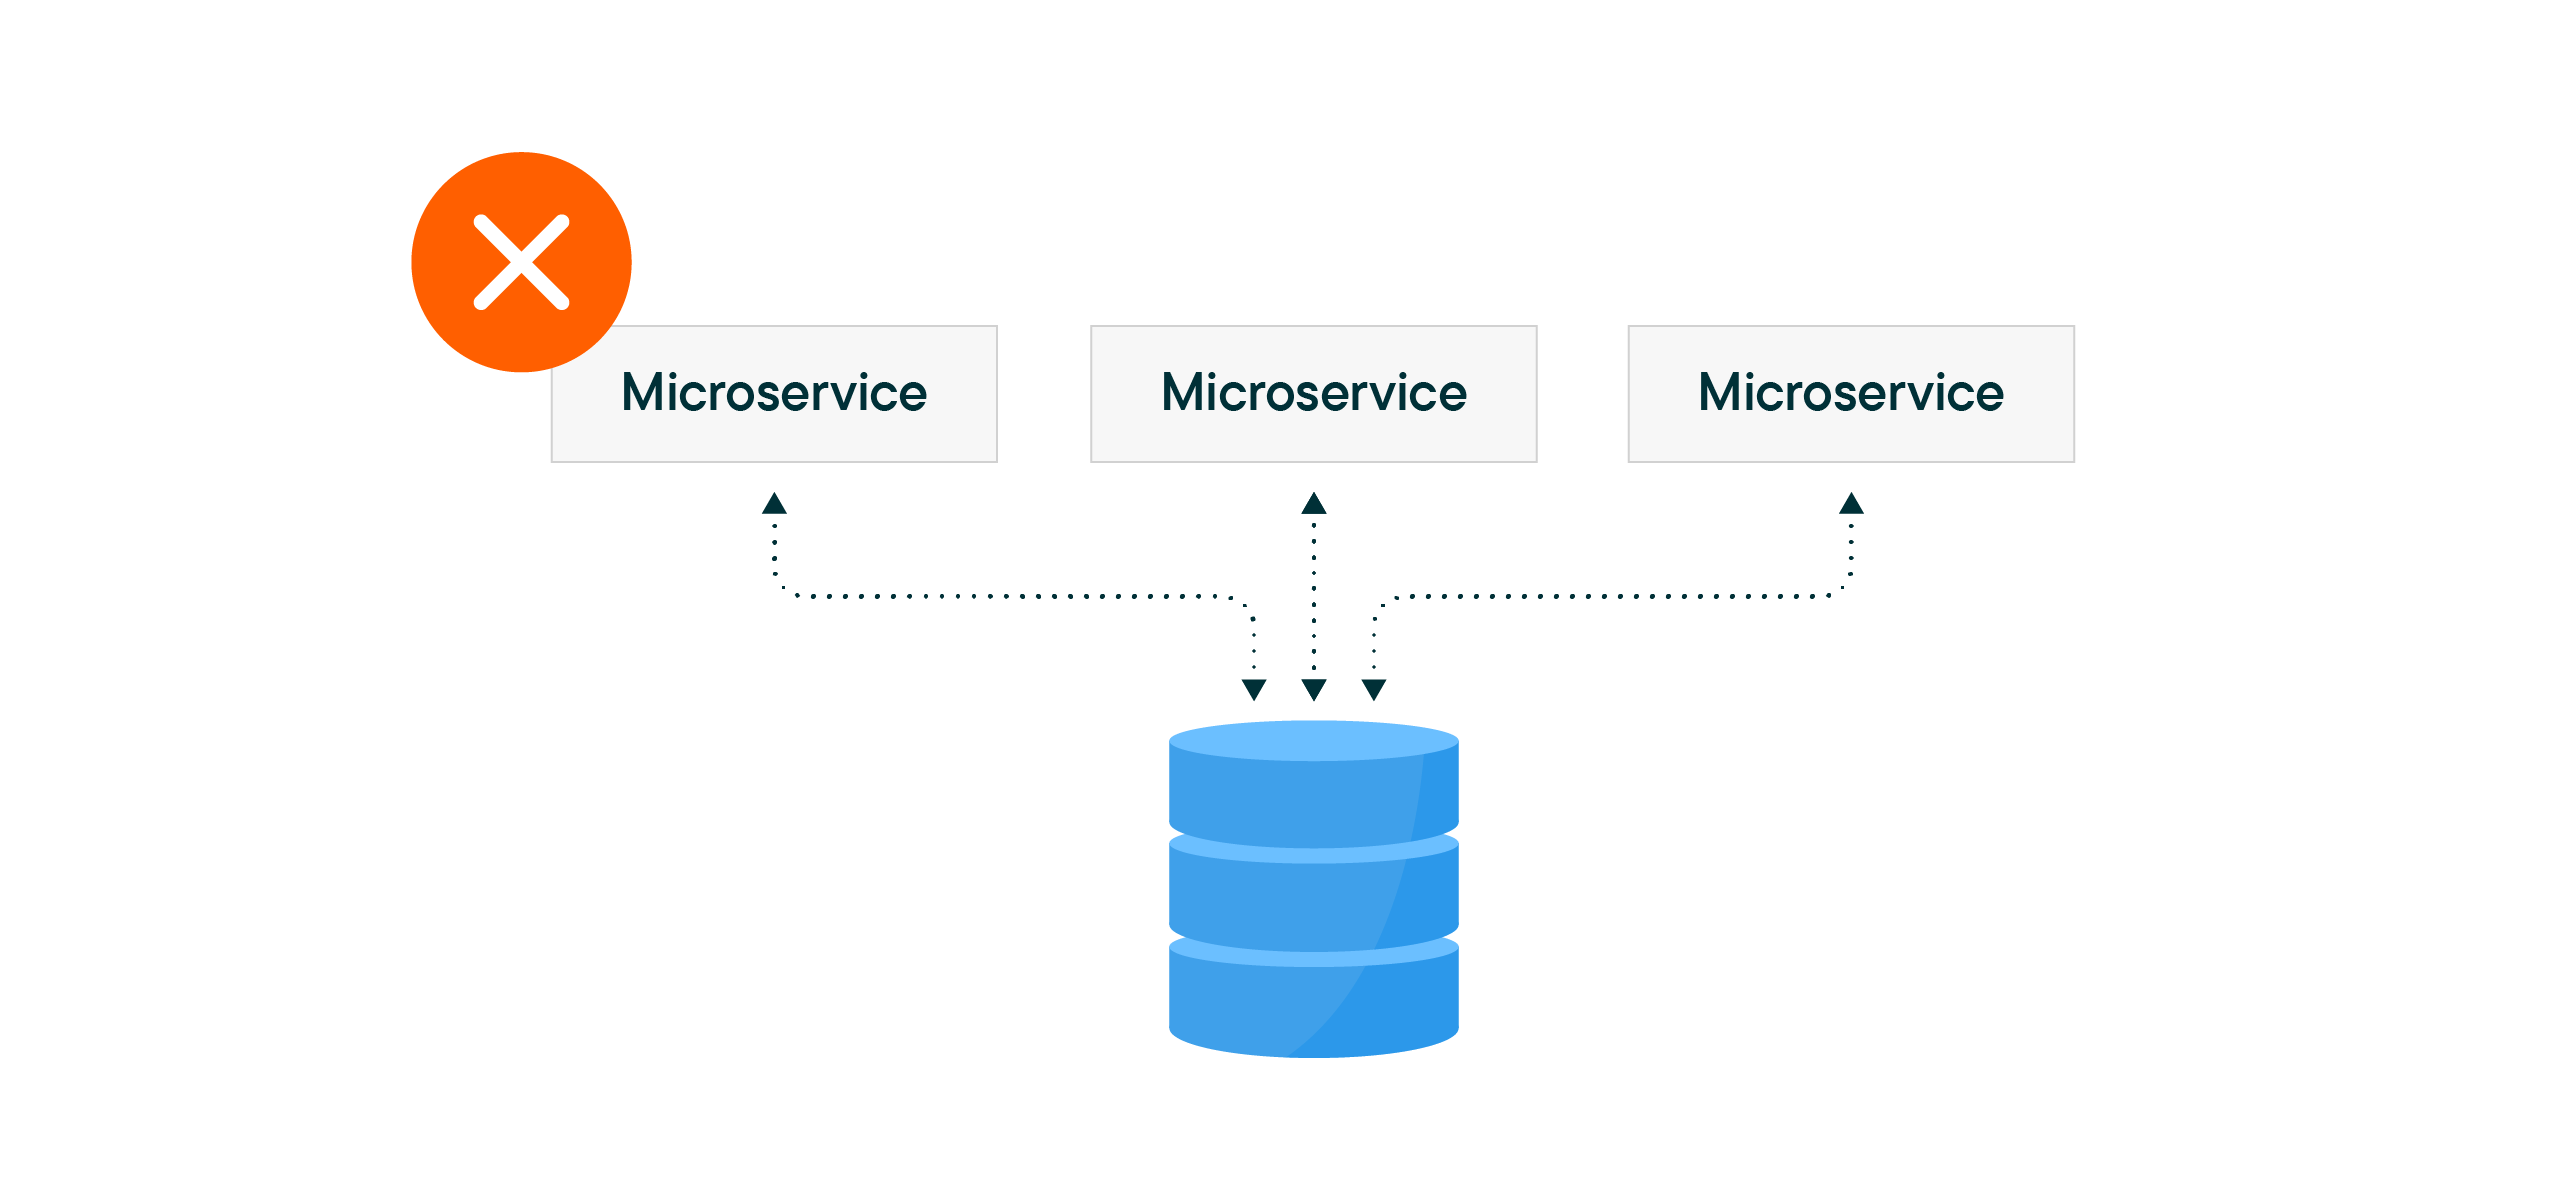 Why microservices shouldn’t share data